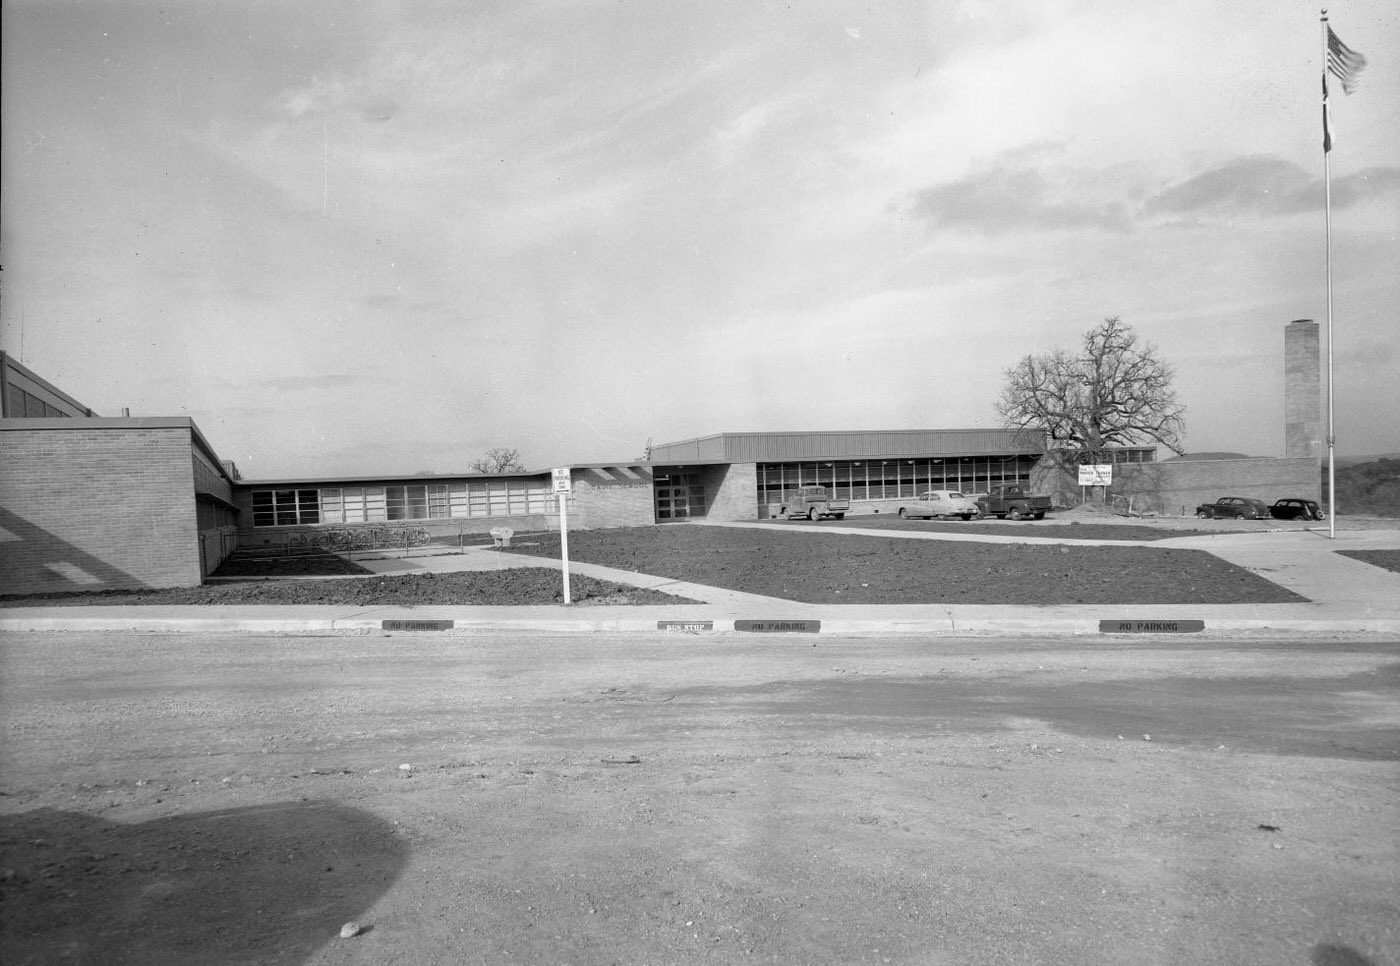 Casis Elementary School with Parked Cars, 1951